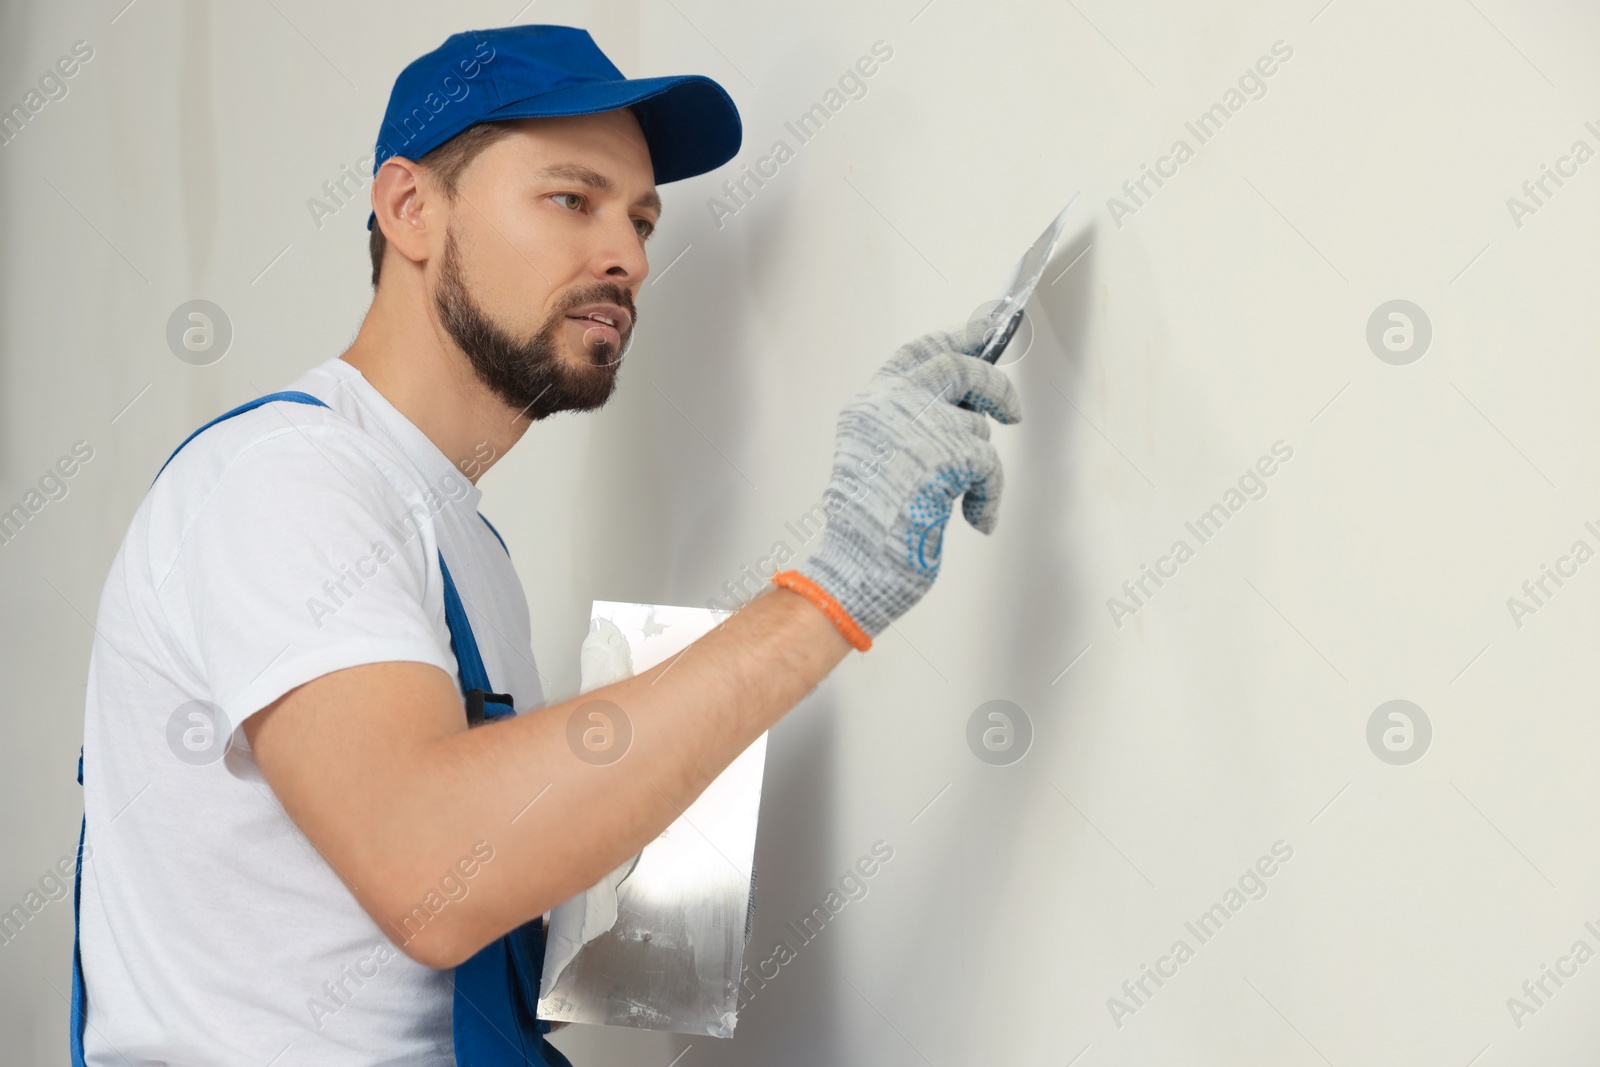 Photo of Professional worker plastering wall with putty knives indoors